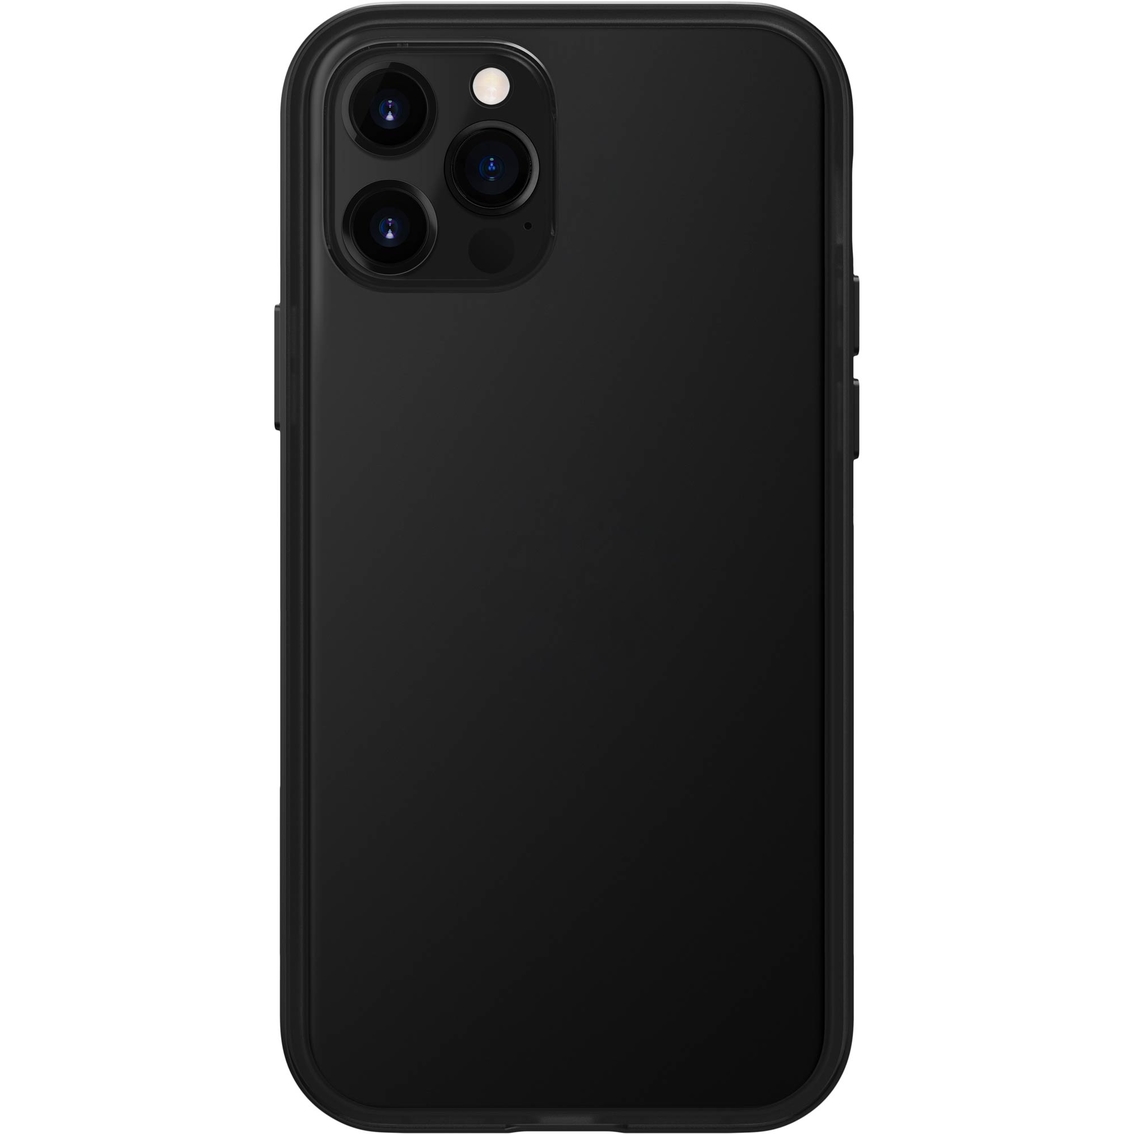 LAUT Design USA Exoframe Case for iPhone 12 Pro Max - Image 2 of 5